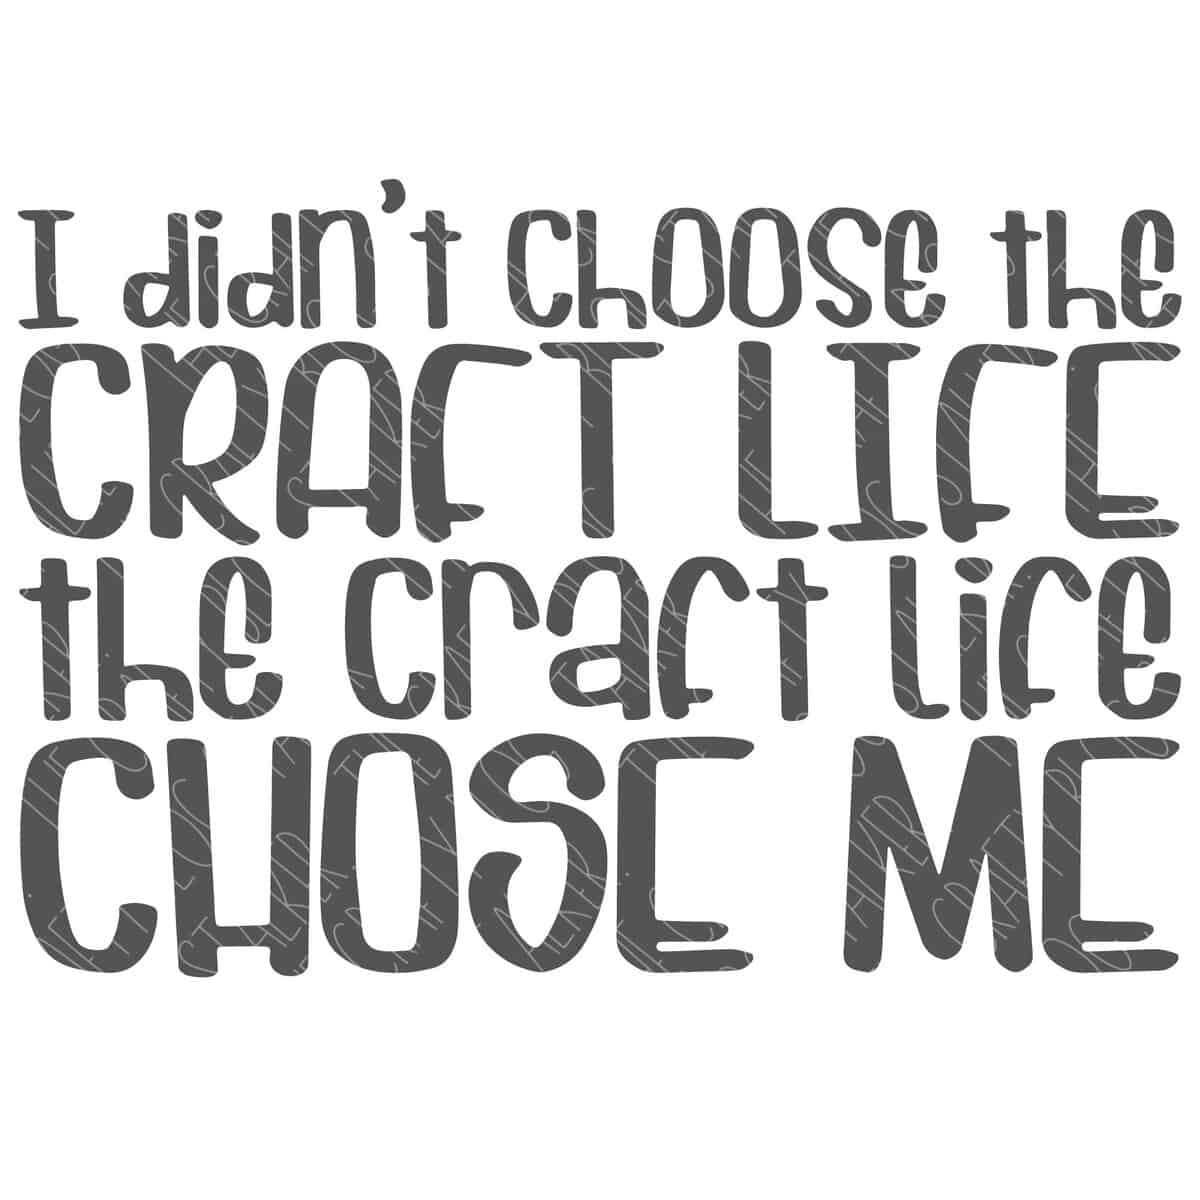 SVG Cut File: I didn't choose the craft life the craft life chose me.